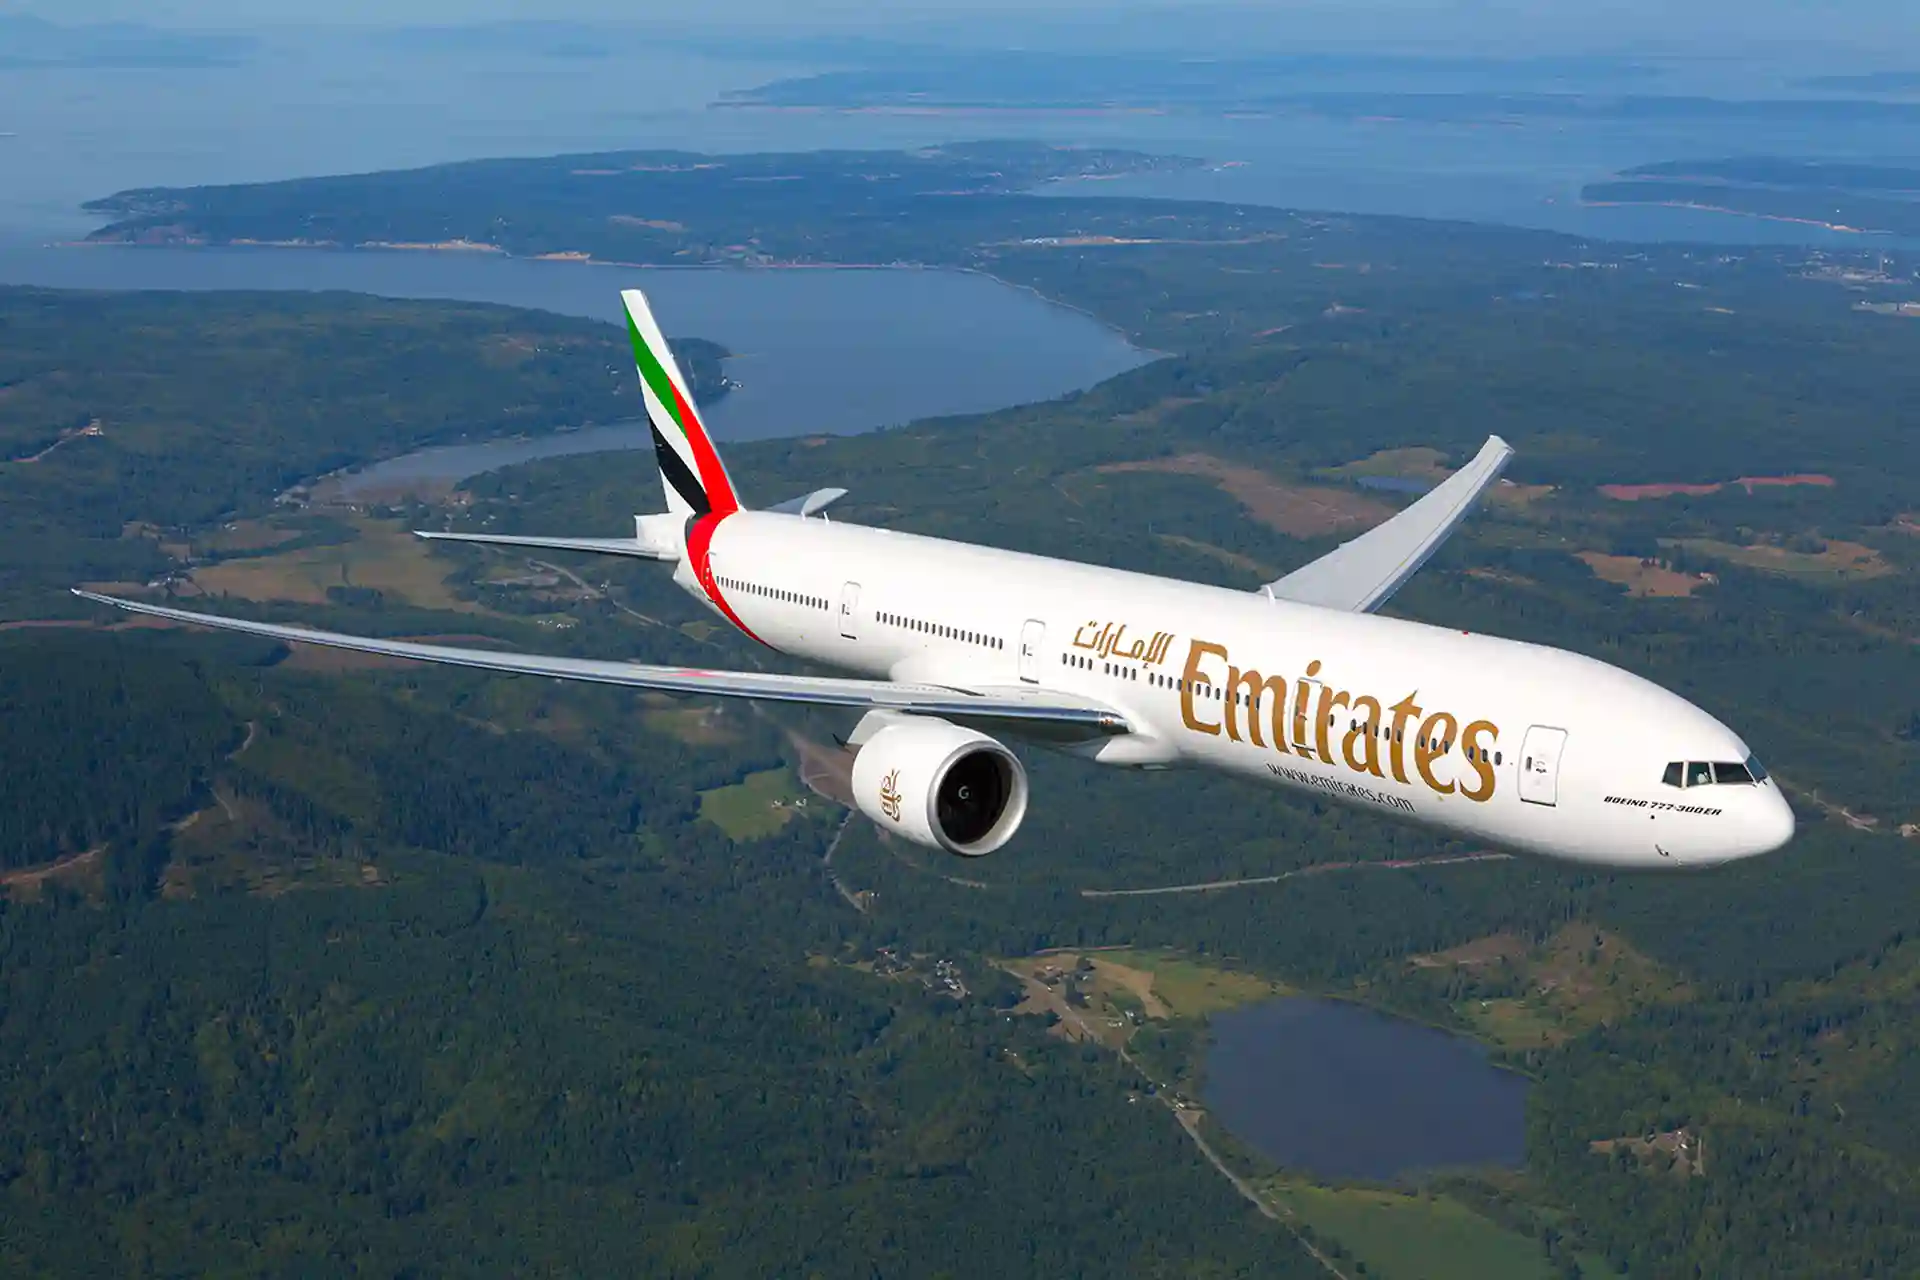 Emirates Resumes Flights To Zimbabwe And Zambia, Plans To Increase Weekly Flights To 5